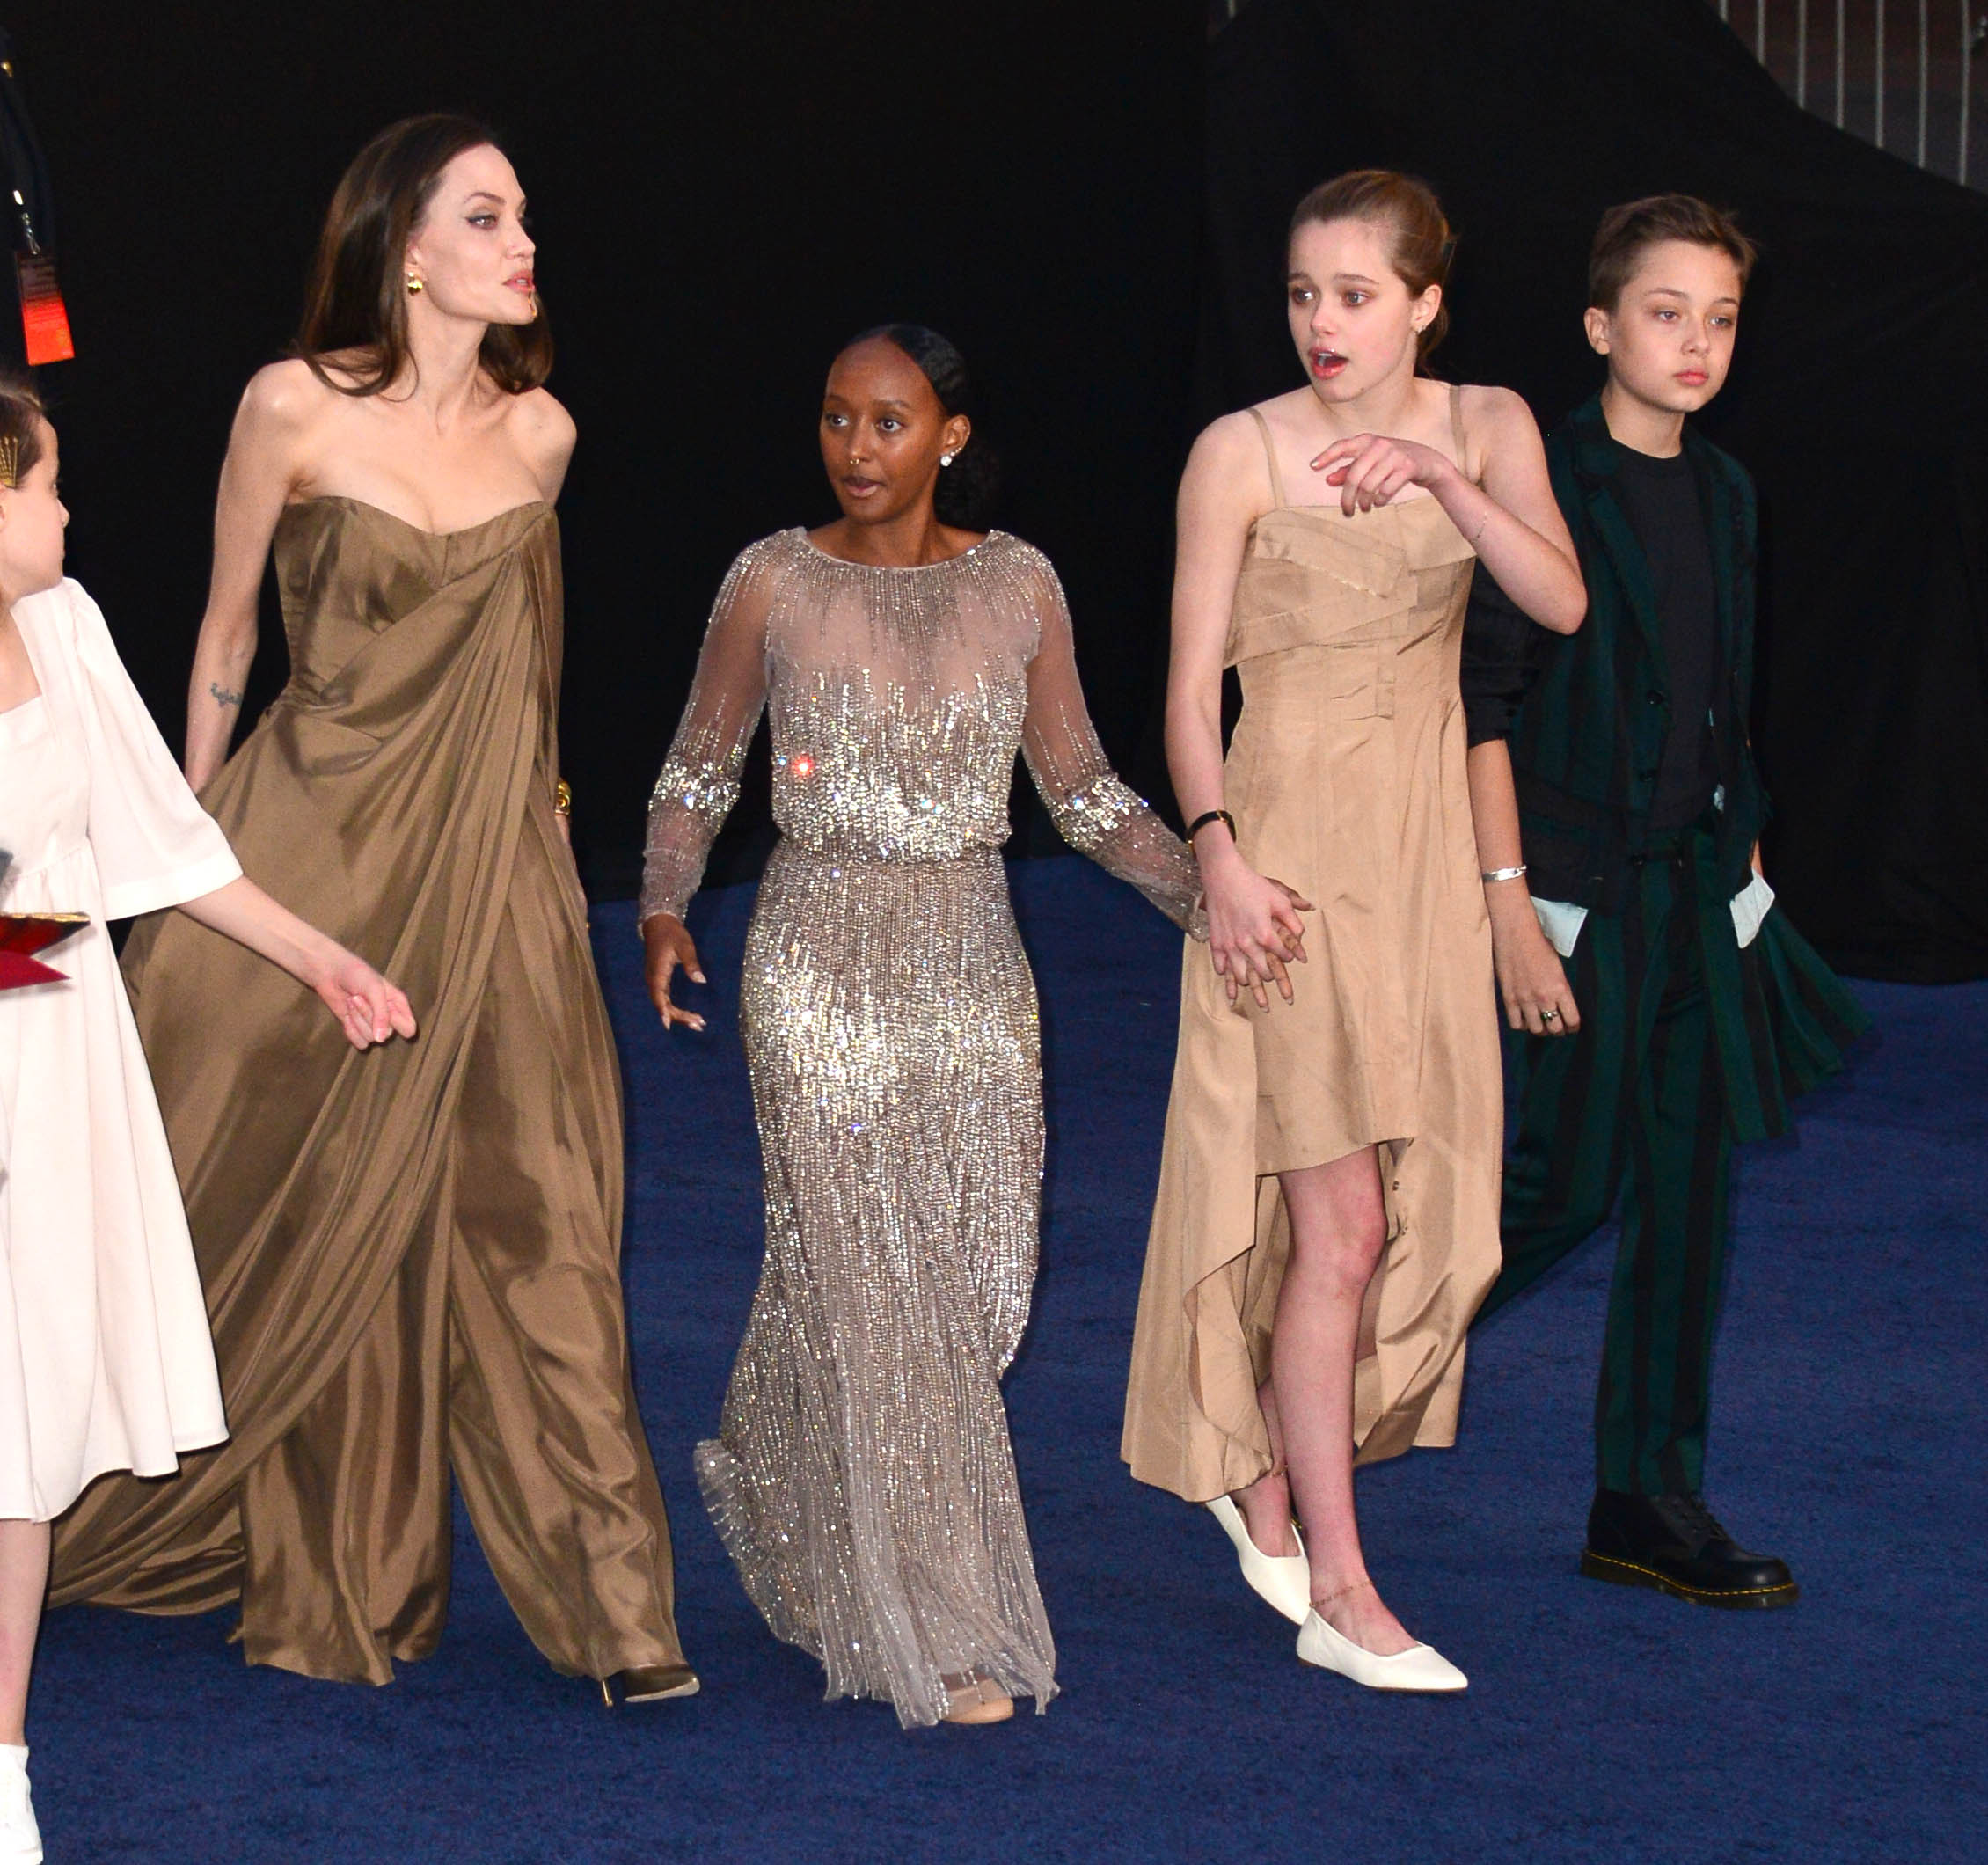 Angelina Jolie and her children Zahara, Shiloh and Knox Jolie in Los Angeles in 2021 | Source: Getty Images